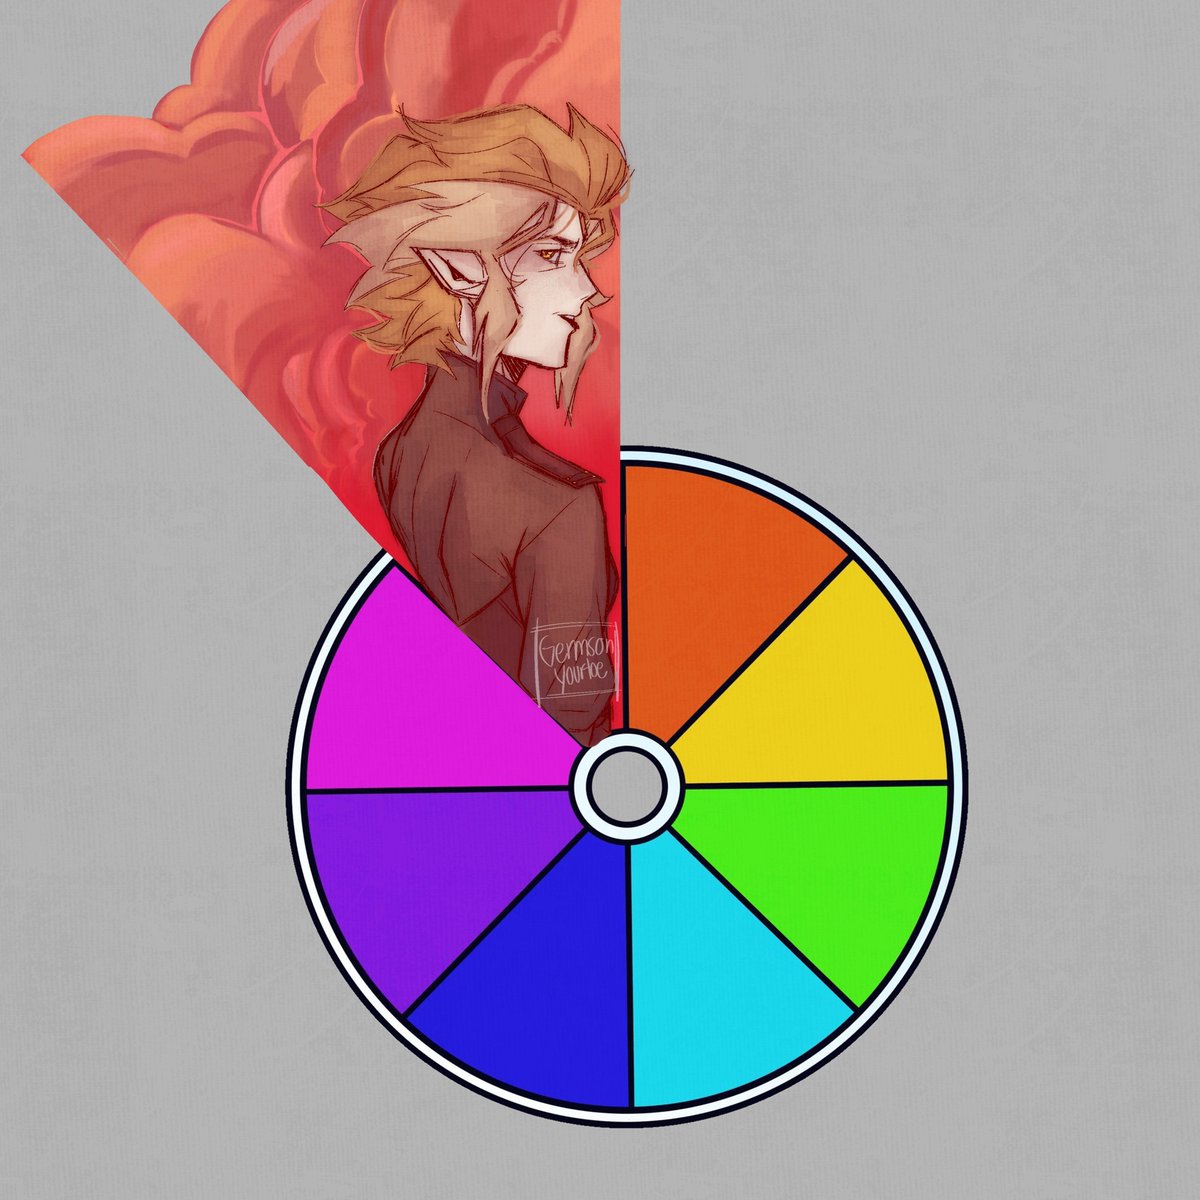 Swap AU Color Wheel

Eda Clawthorne, the Head Potion Master, is the most infamous of the Coven Heads, both for her magic practices favoring wilder ways, and her past as an active force against Belos' regime. (1/8)

(Next up; Luz Noceda)
#EdaClawthorne #TheOwlHouse #TOH #tohfanart